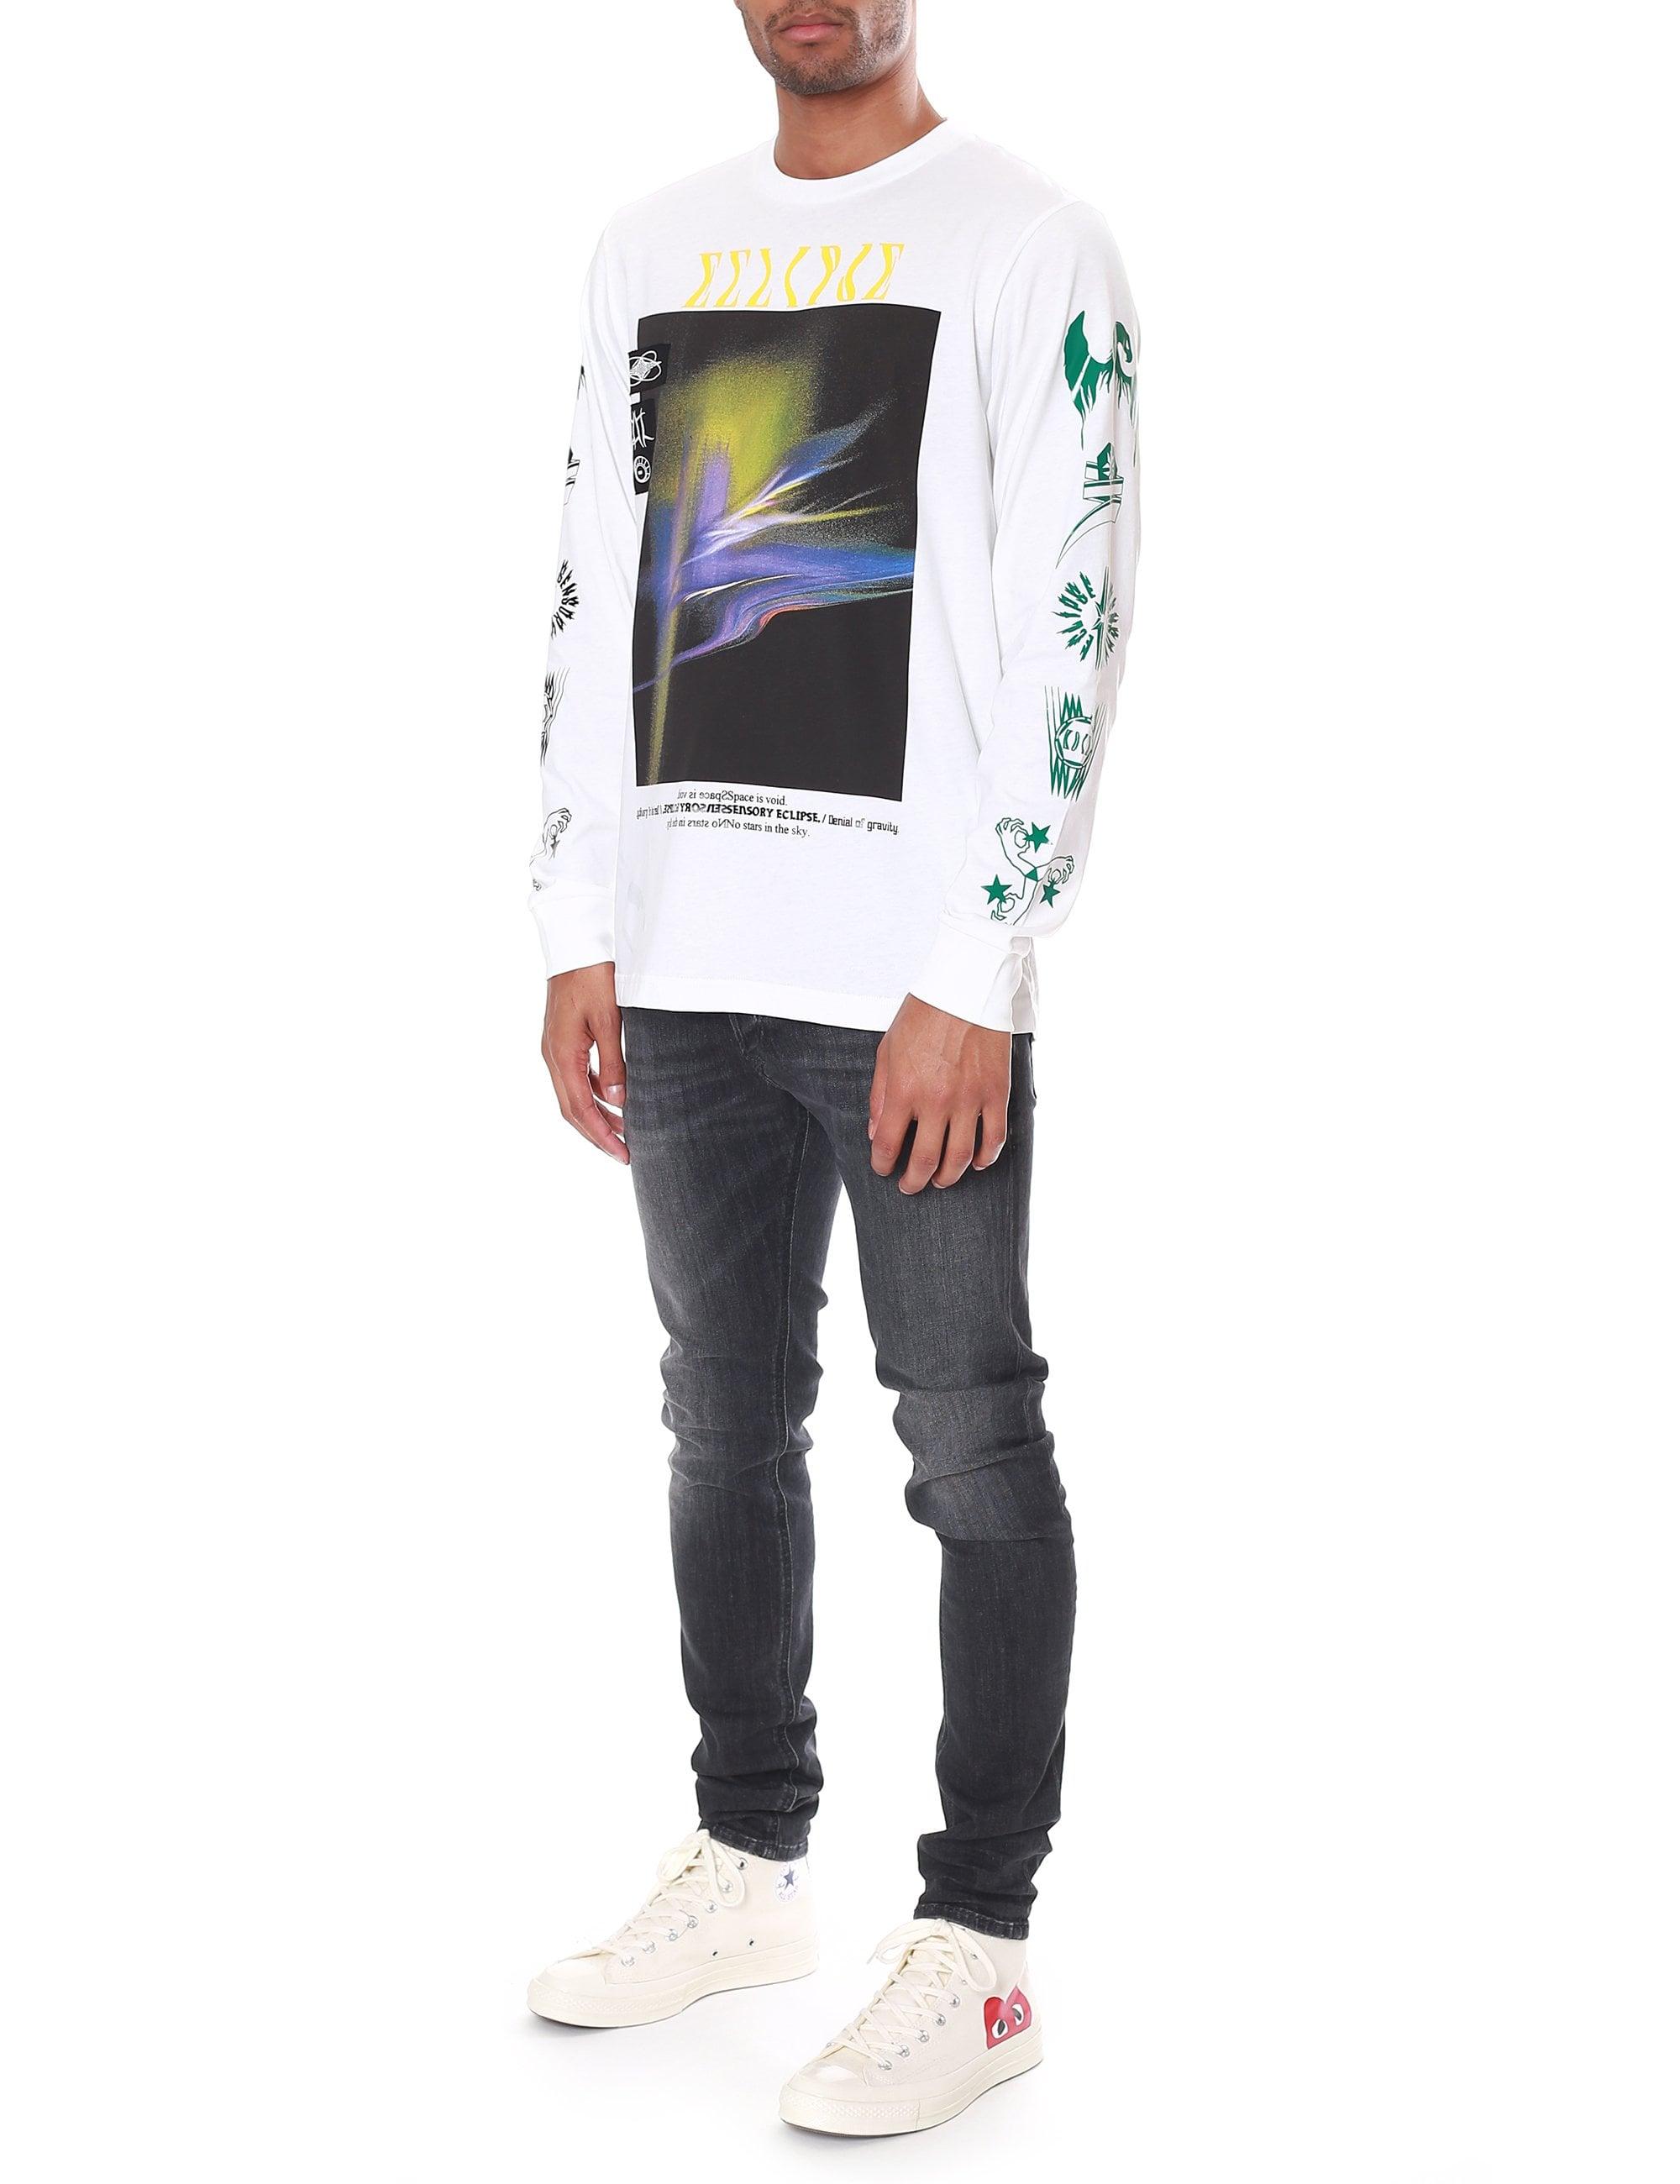 DIESEL Cotton Mixed Graphics Long Sleeve T-shirt in White for Men - Lyst